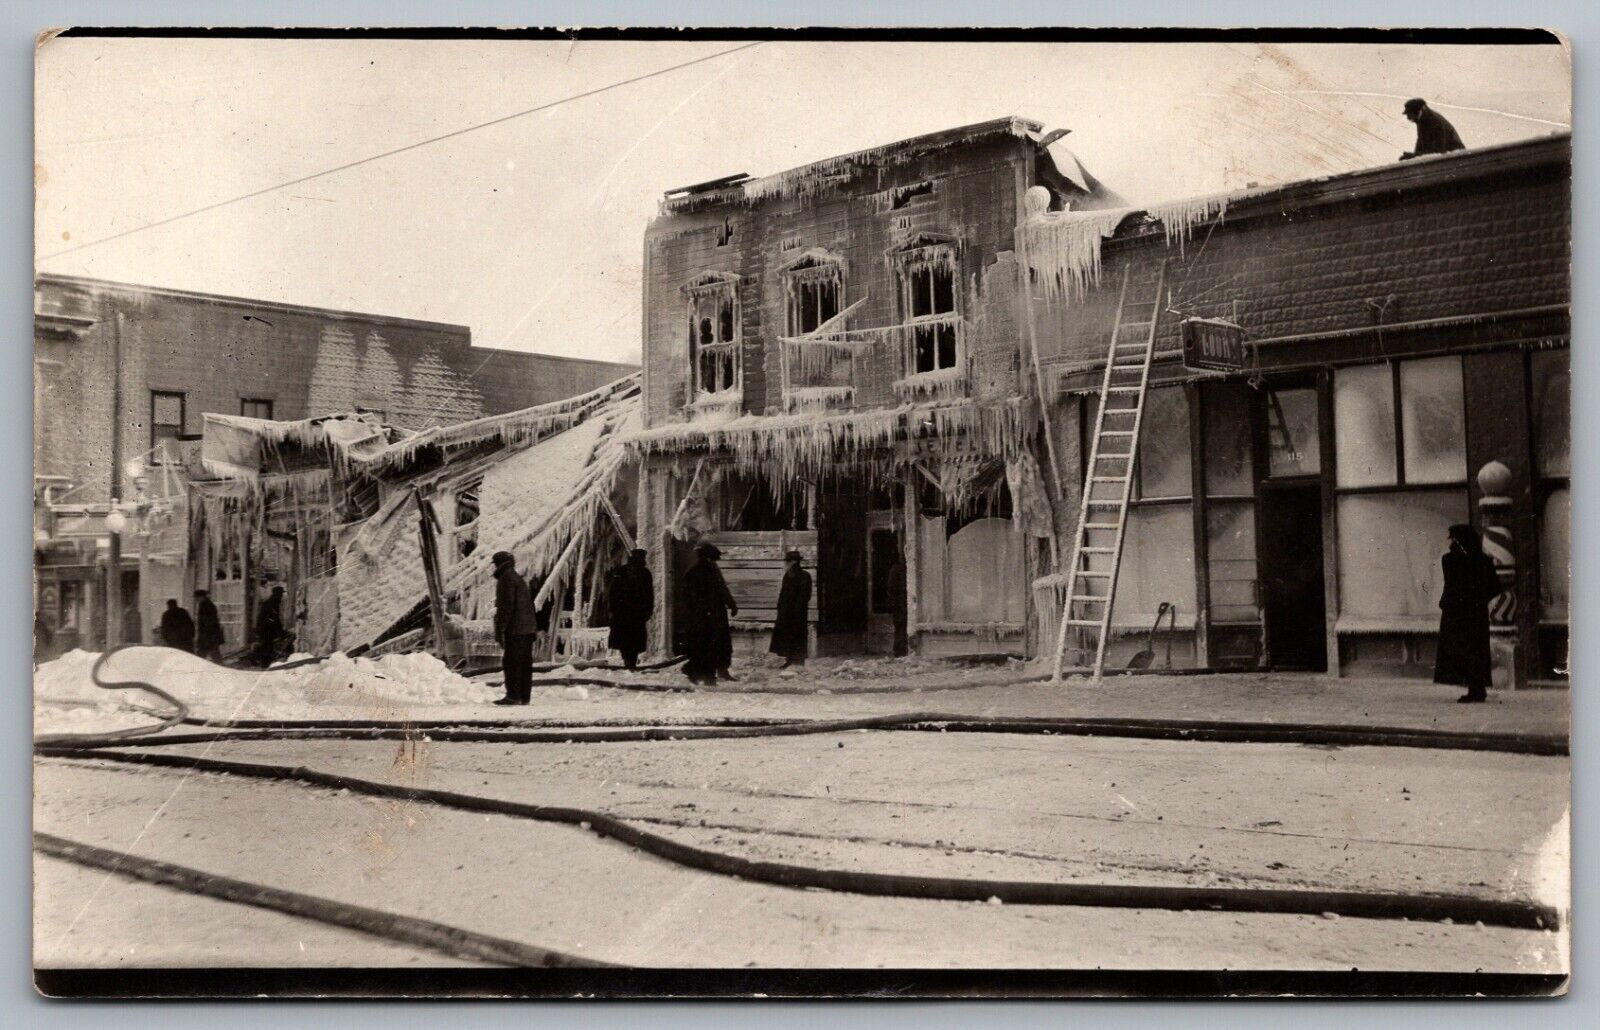 Postcard RPPC, A Fire Destroyed The Building, Winter, Ice, People, Street View